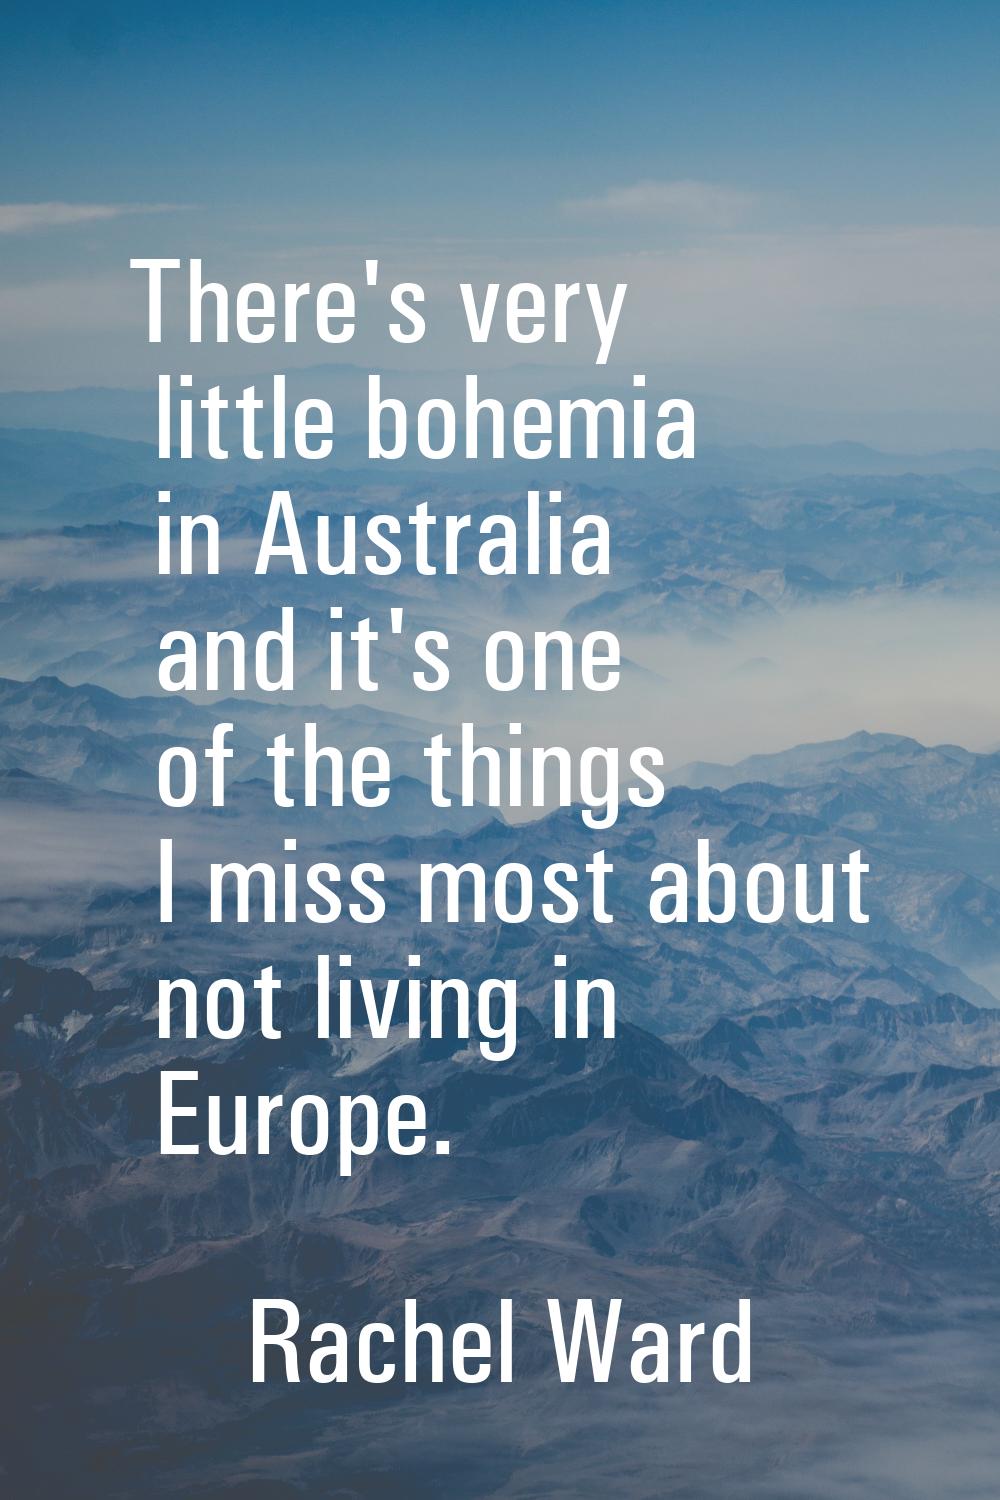 There's very little bohemia in Australia and it's one of the things I miss most about not living in